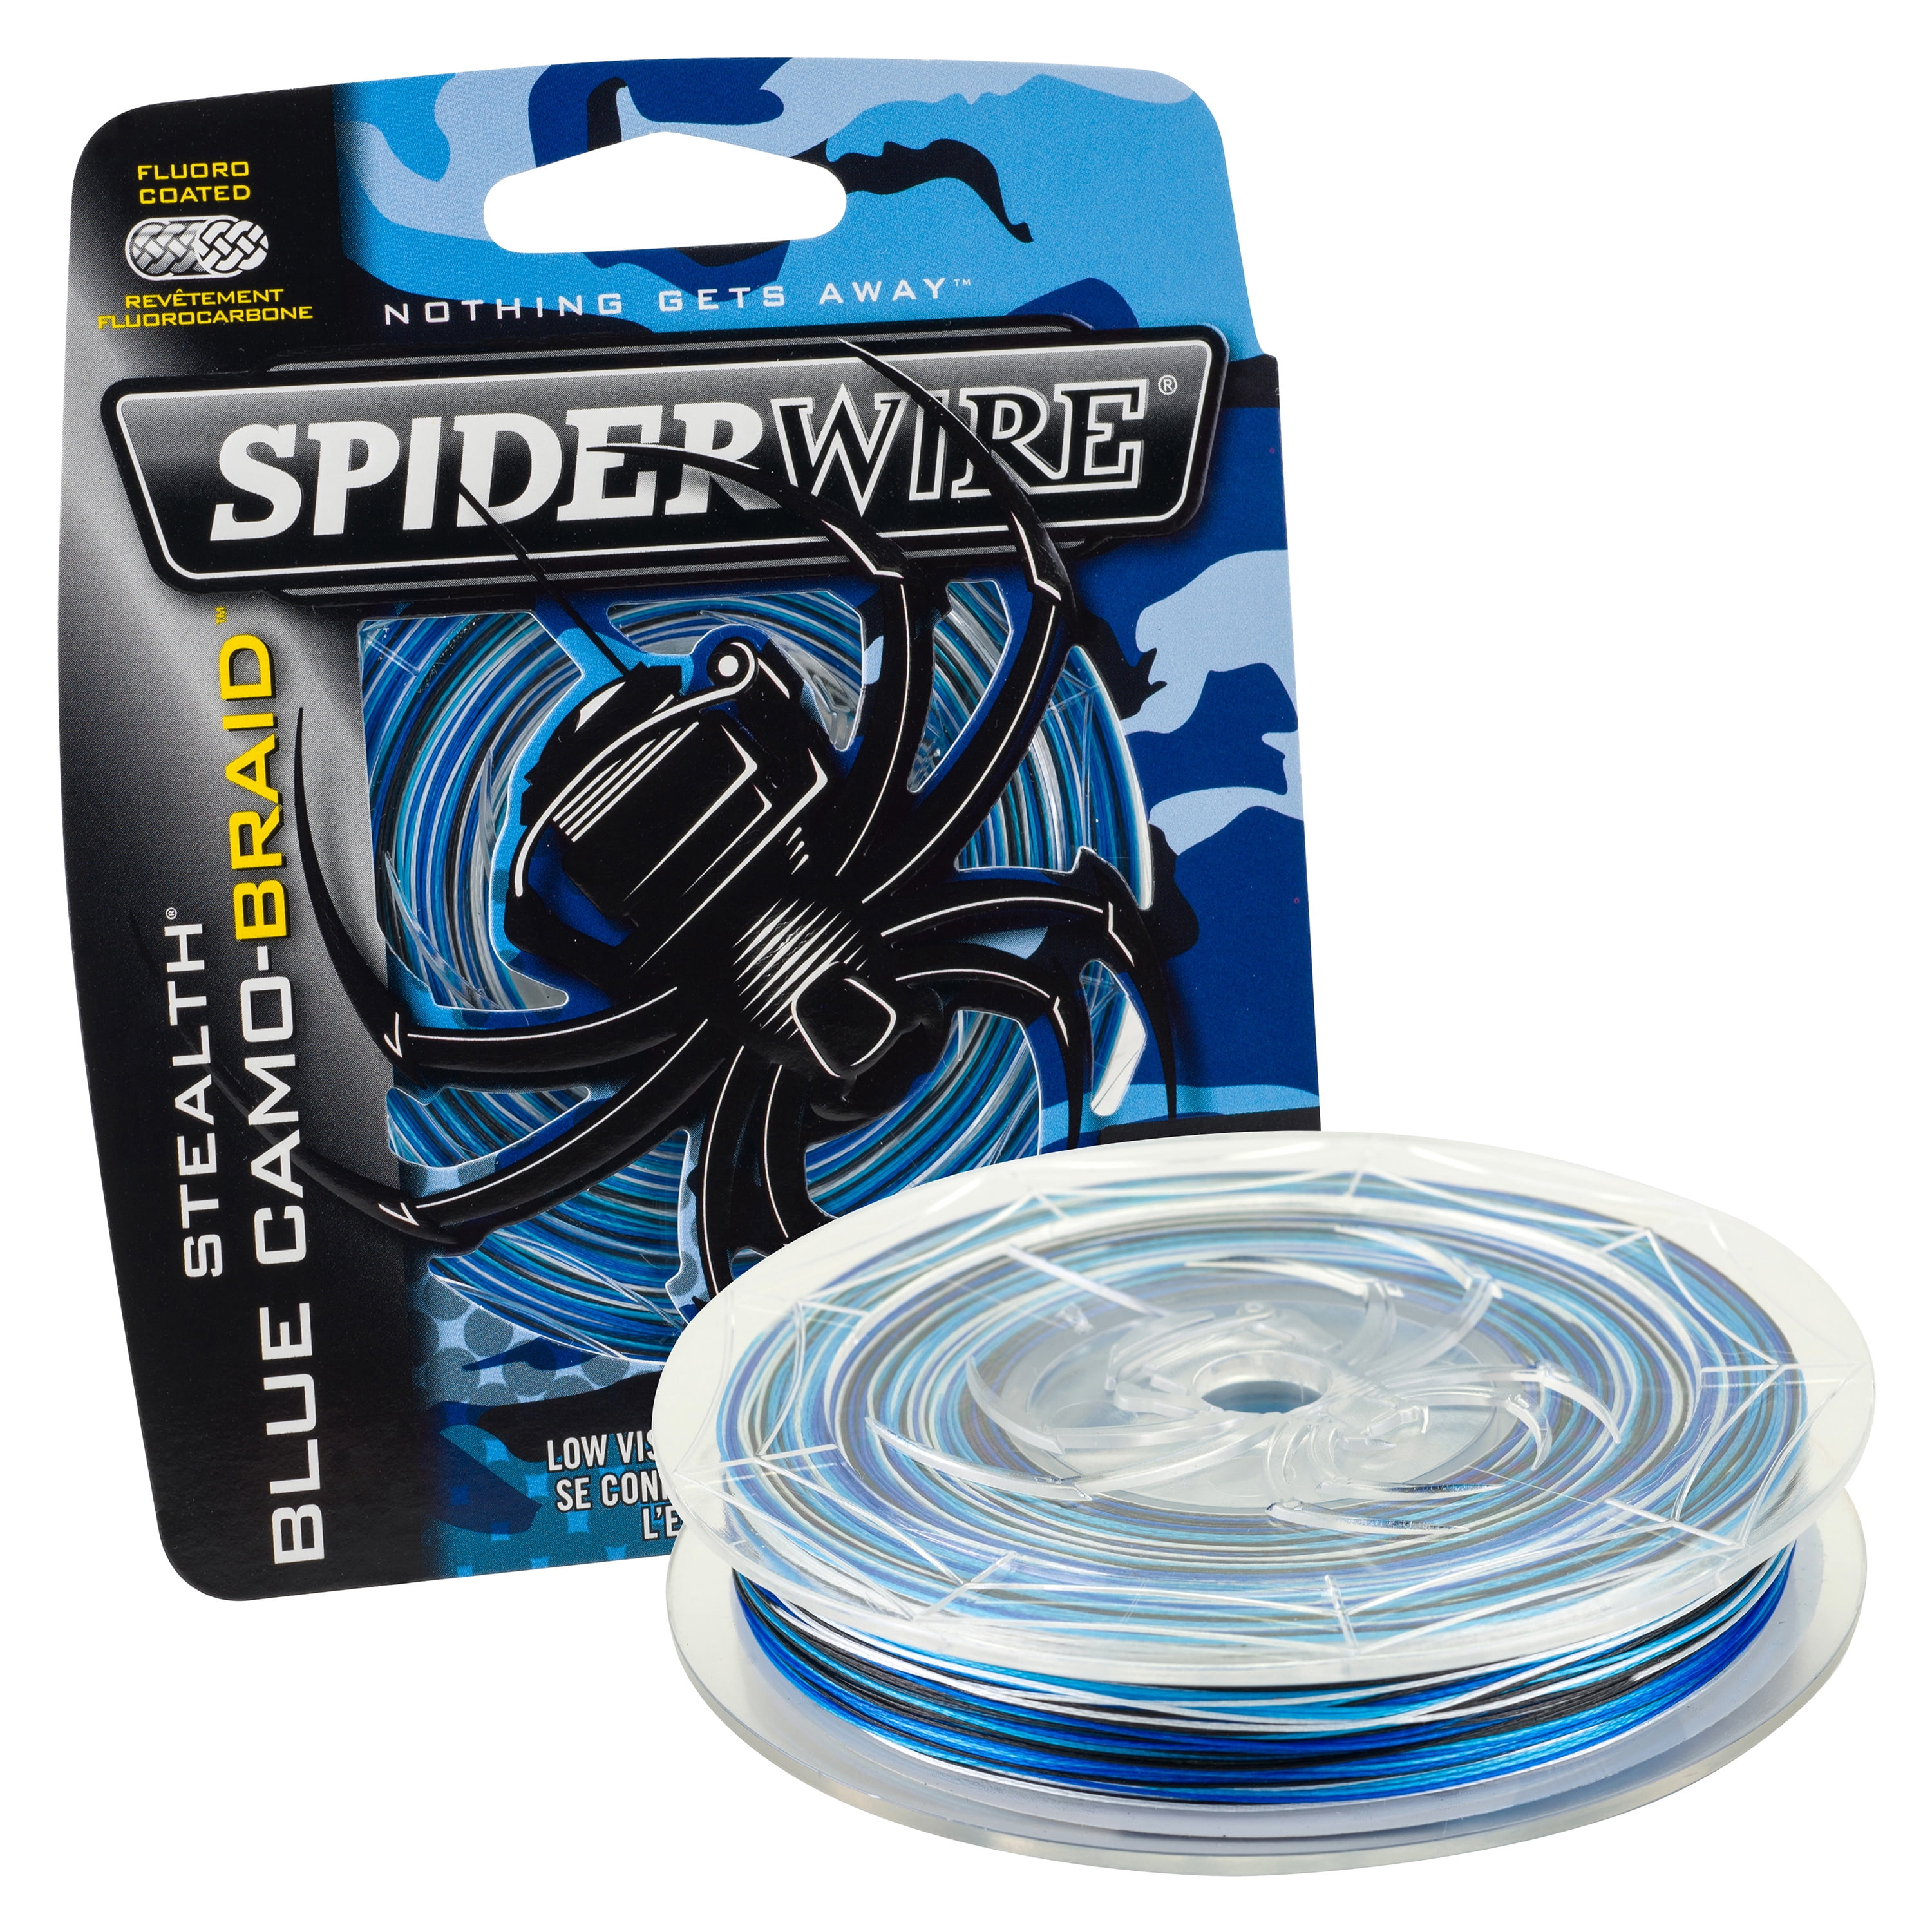 Spiderwire Fly Fishing Line & Leaders for sale